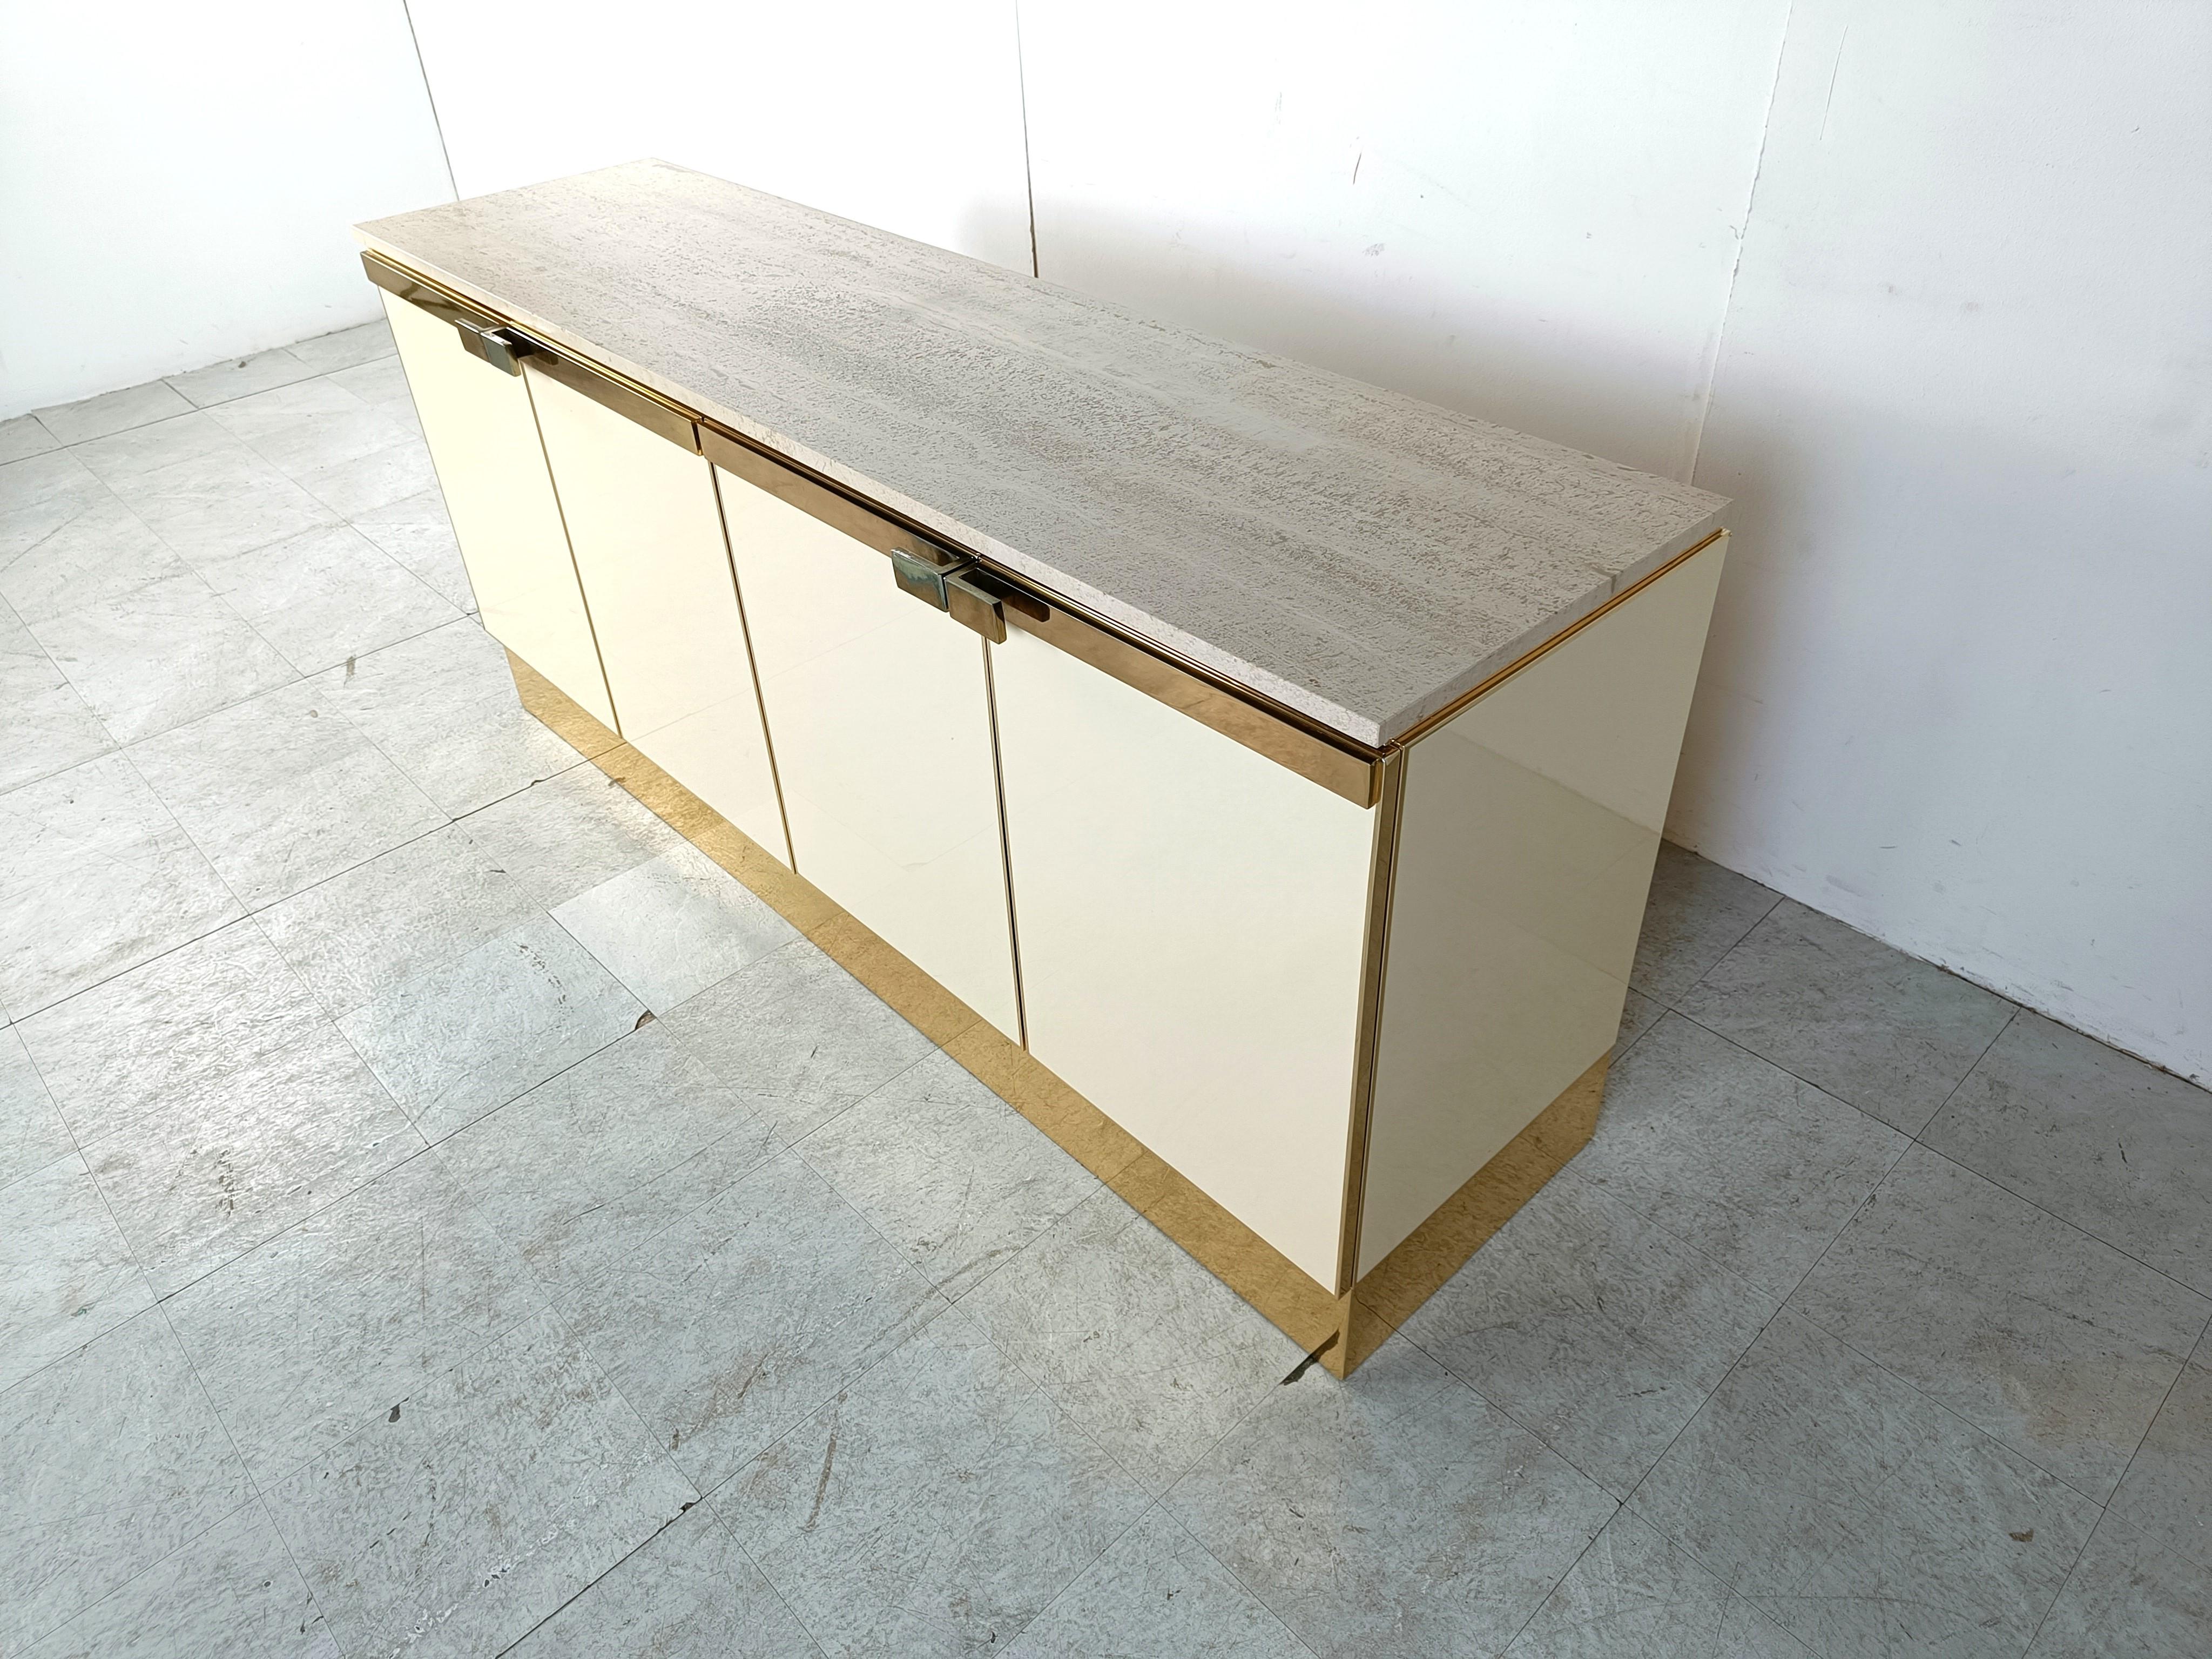 Beautiful beige lacquered credenza with 4 doors and brass hardware.

The sideboard is finished with a nice travertine table top 

Good condition.

1980s - France

Dimensions:
Lenght: 180cm
Height: 80cm
Depth: 50cm

Ref.: 213421